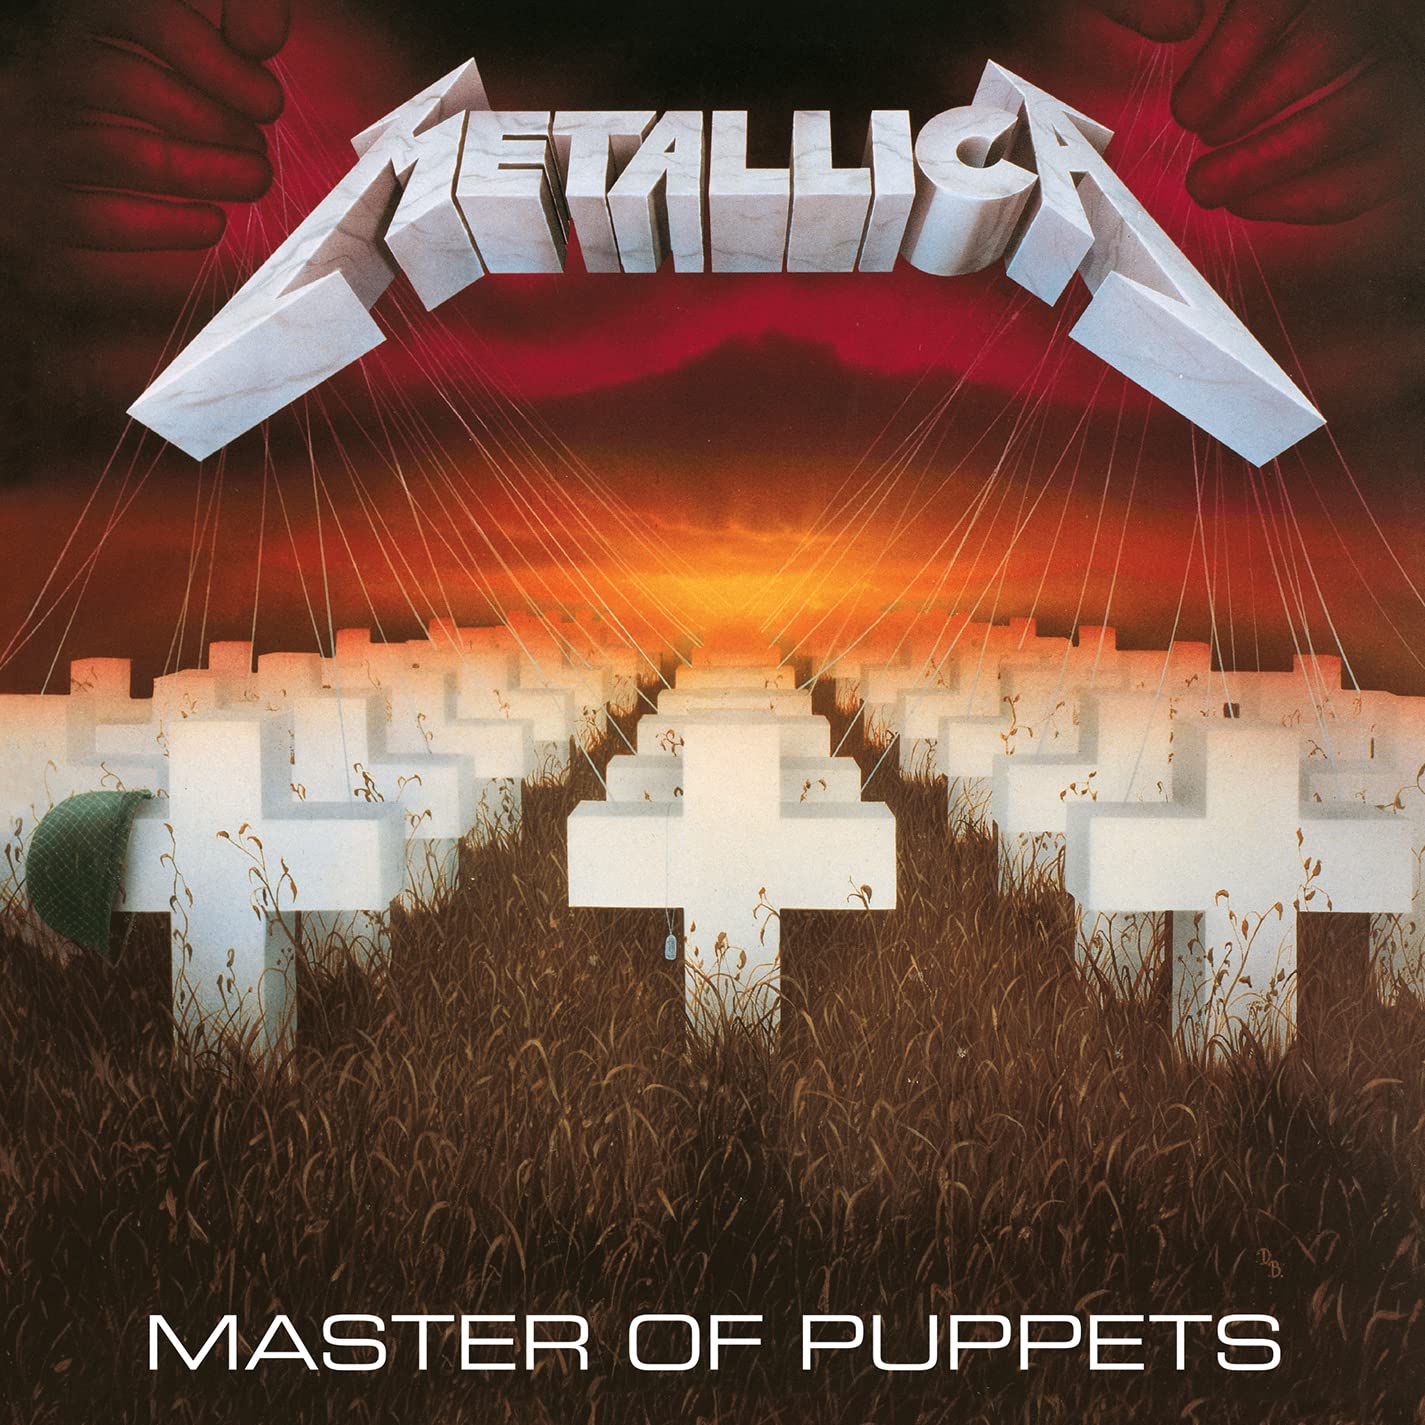 Metallica Master Of Puppets Remastered CD w/ AutoRip MP3 Album $5 + Free Shipping w/ Prime or on $35+